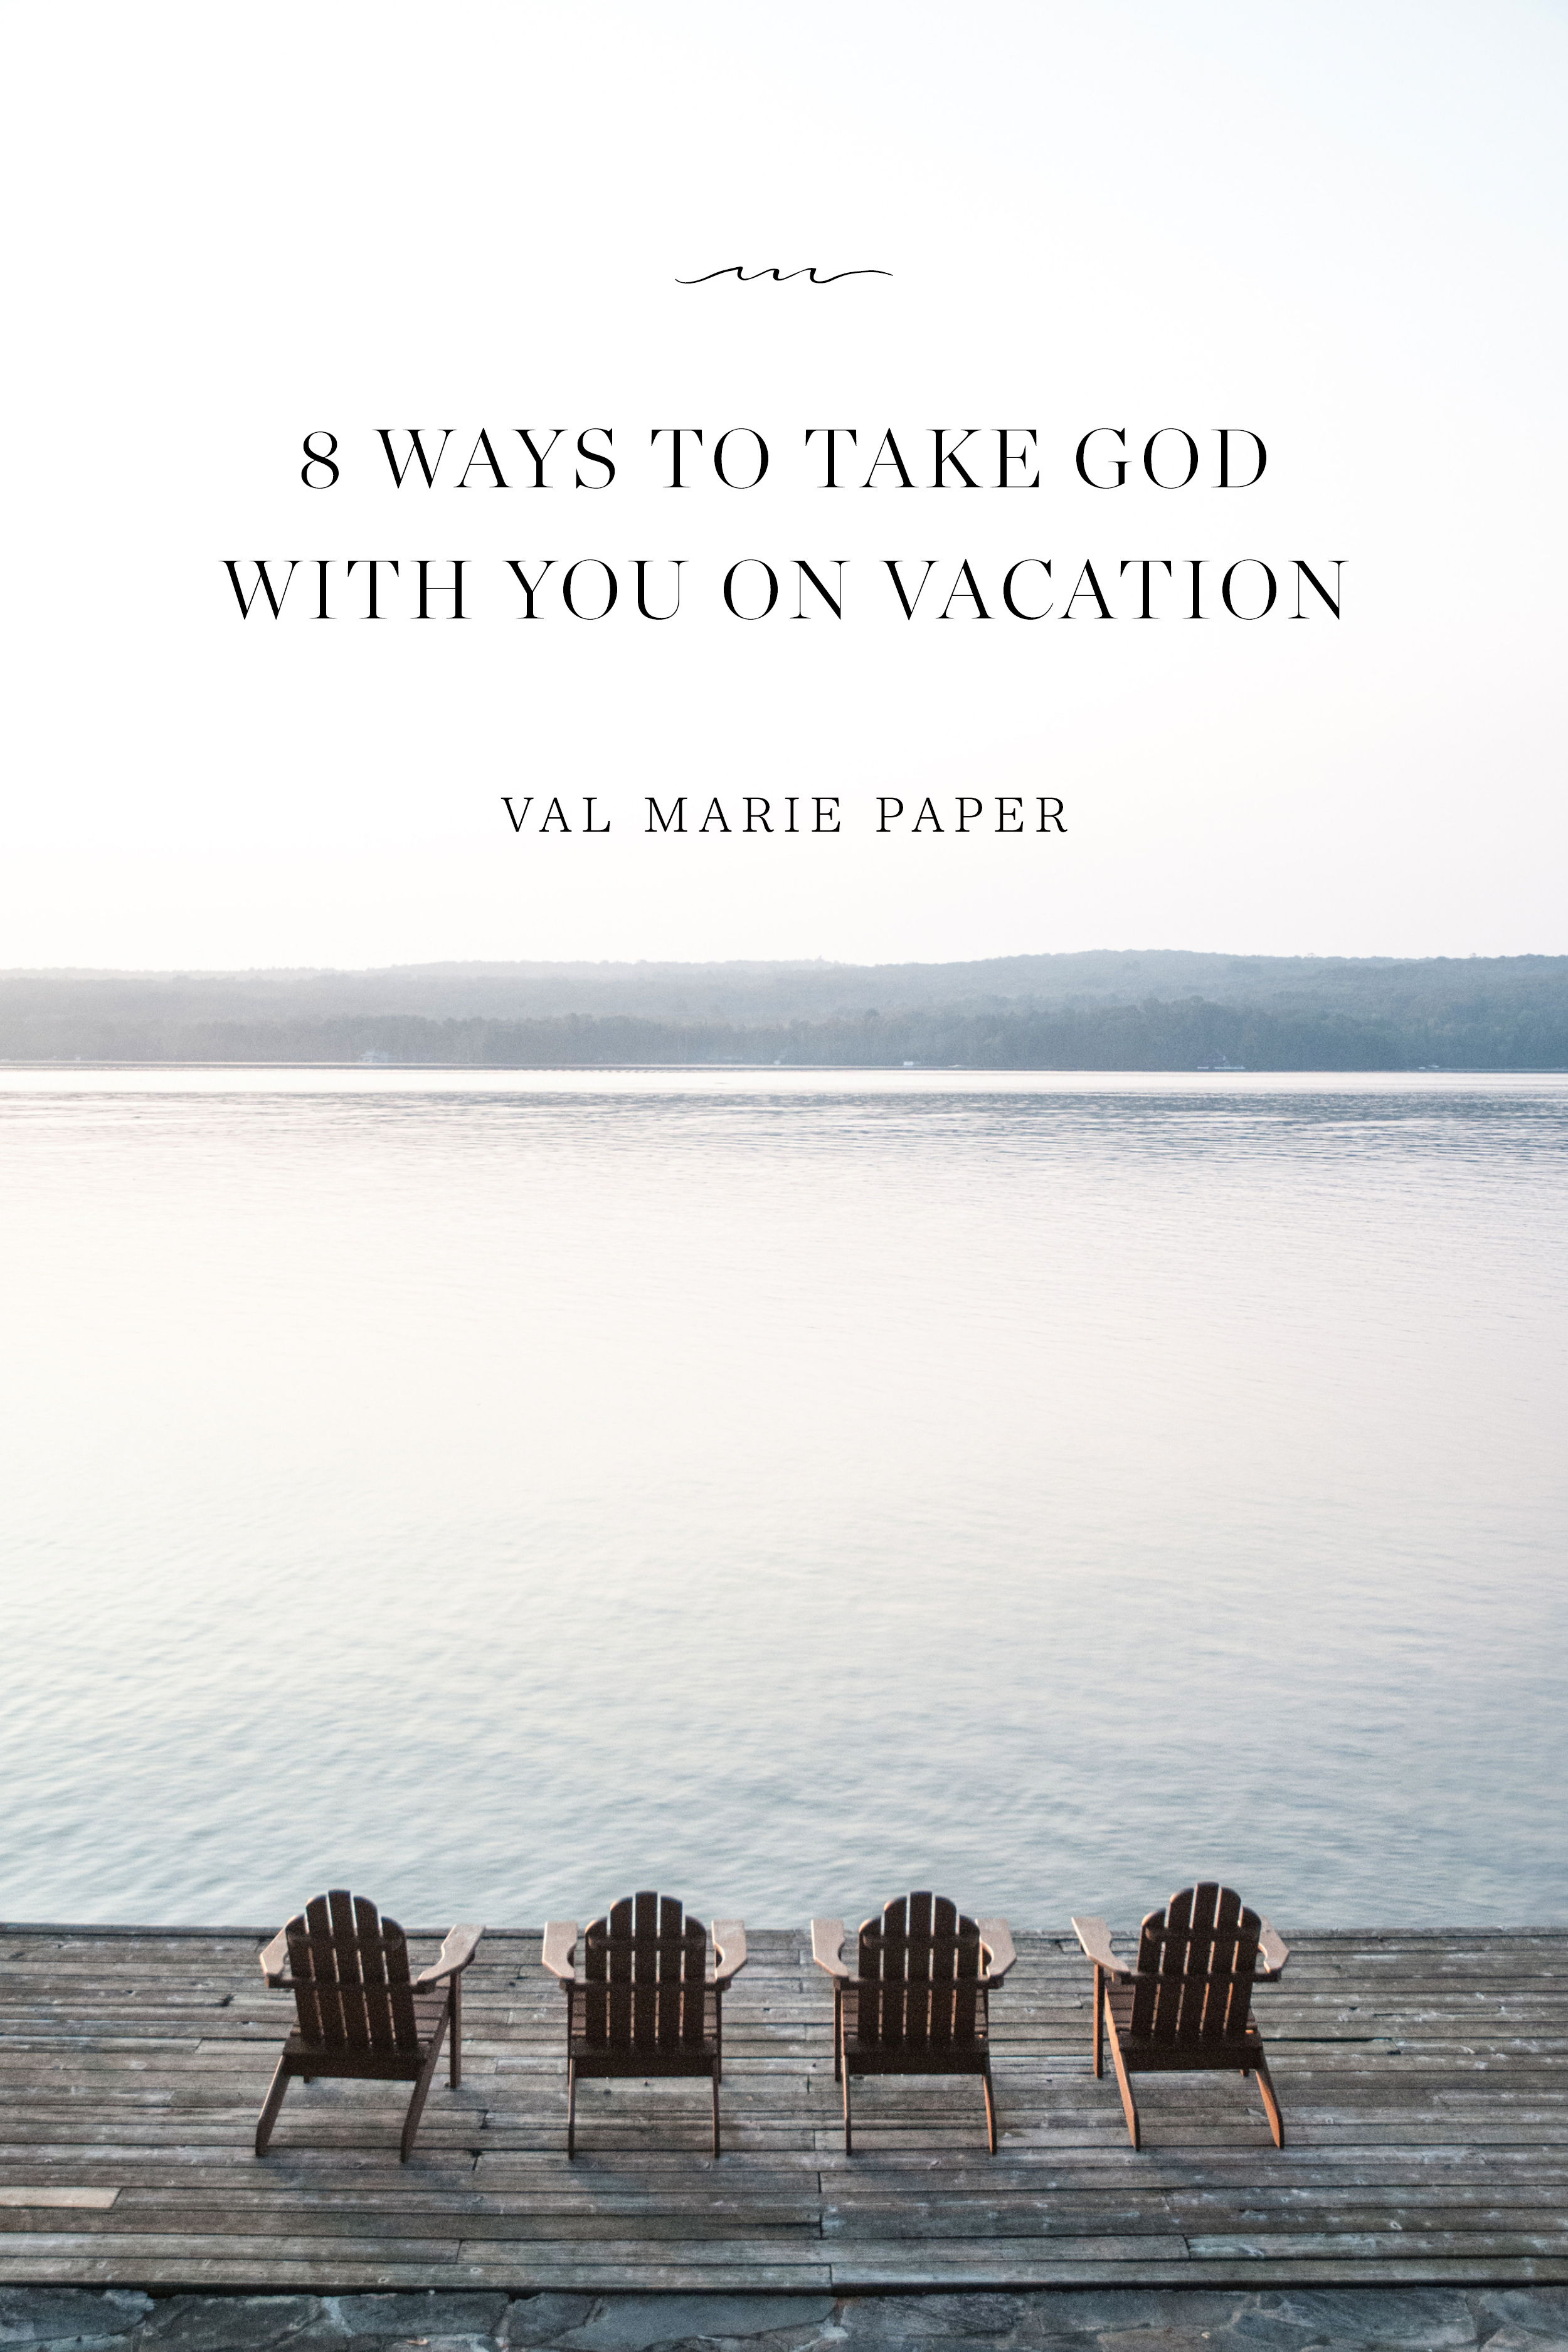 How to meet with God on vacation by Valerie Woerner, ministry, prayer, refresh, praying for husband, praying for kids, prayer journal, prayer journaling, vacation